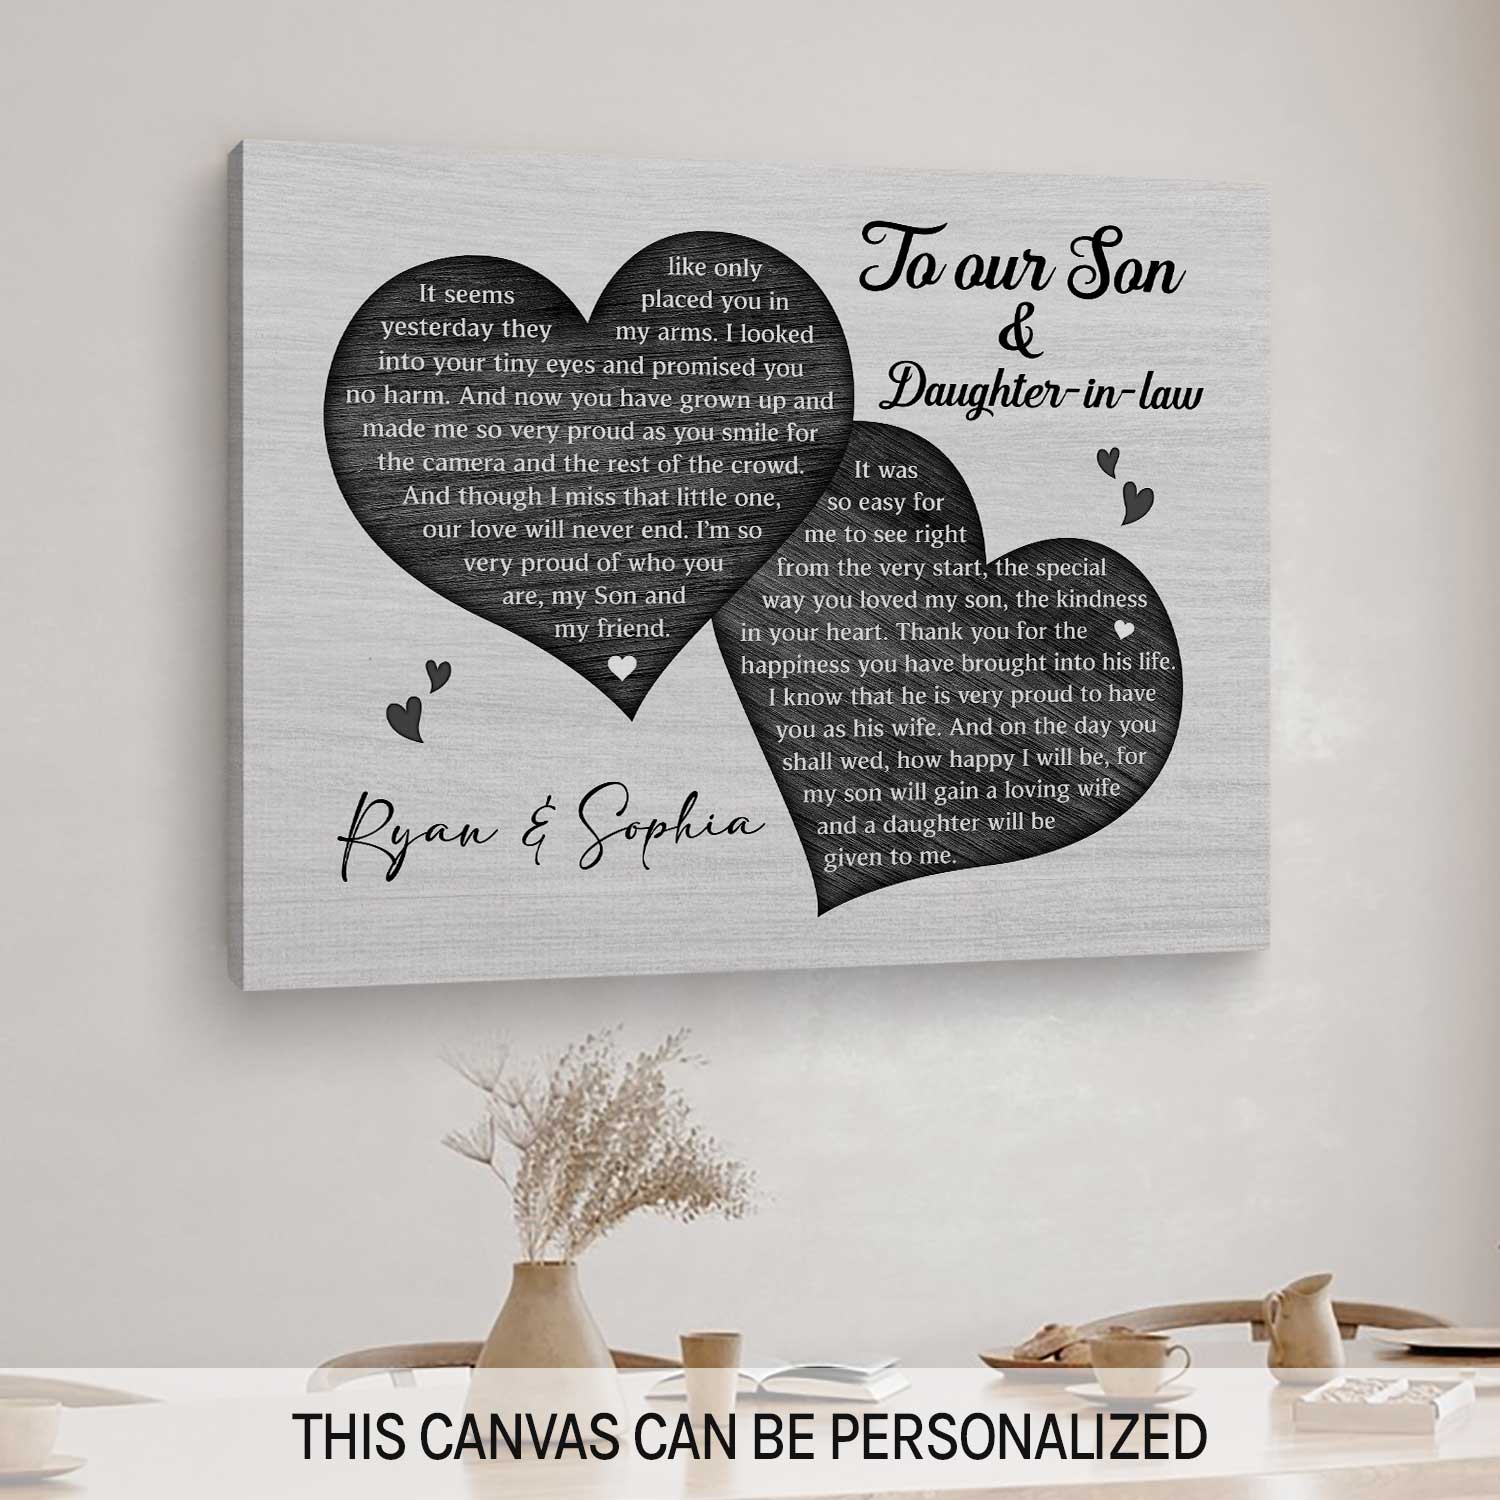 To Our Son & Daughter In Law - Personalized Wedding gift For Son & Daughter In Law from Parents of the Groom - Custom Canvas Print - MyMindfulGifts